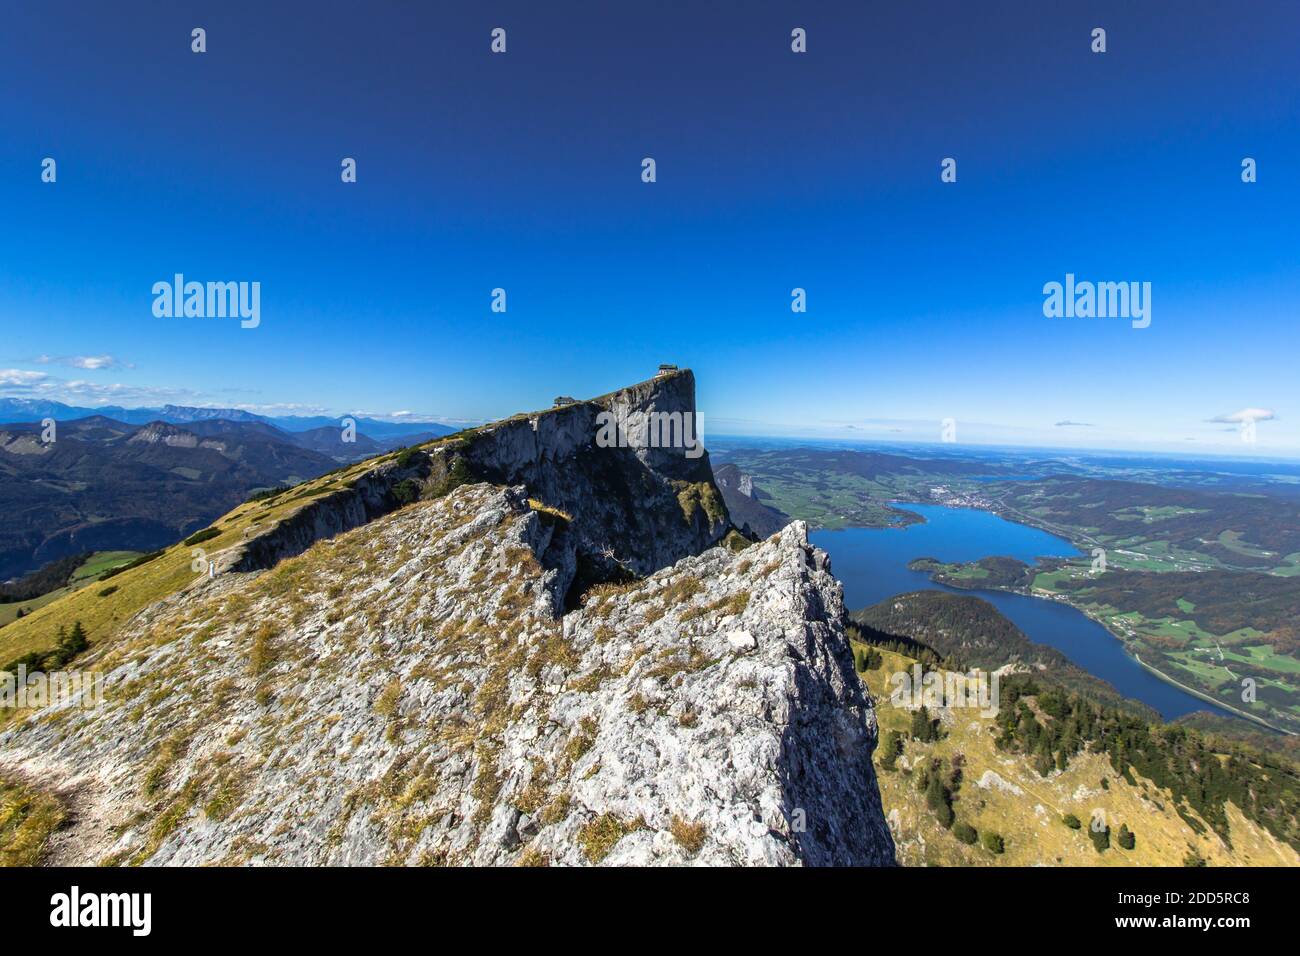 View of lake Mondsee from top of Schafberg,Austria,Salzkammergut region.Blue sky, Alps mountains,Salzburg, nearby Wolfgangsee, Attersee.Hiking in Alps Stock Photo